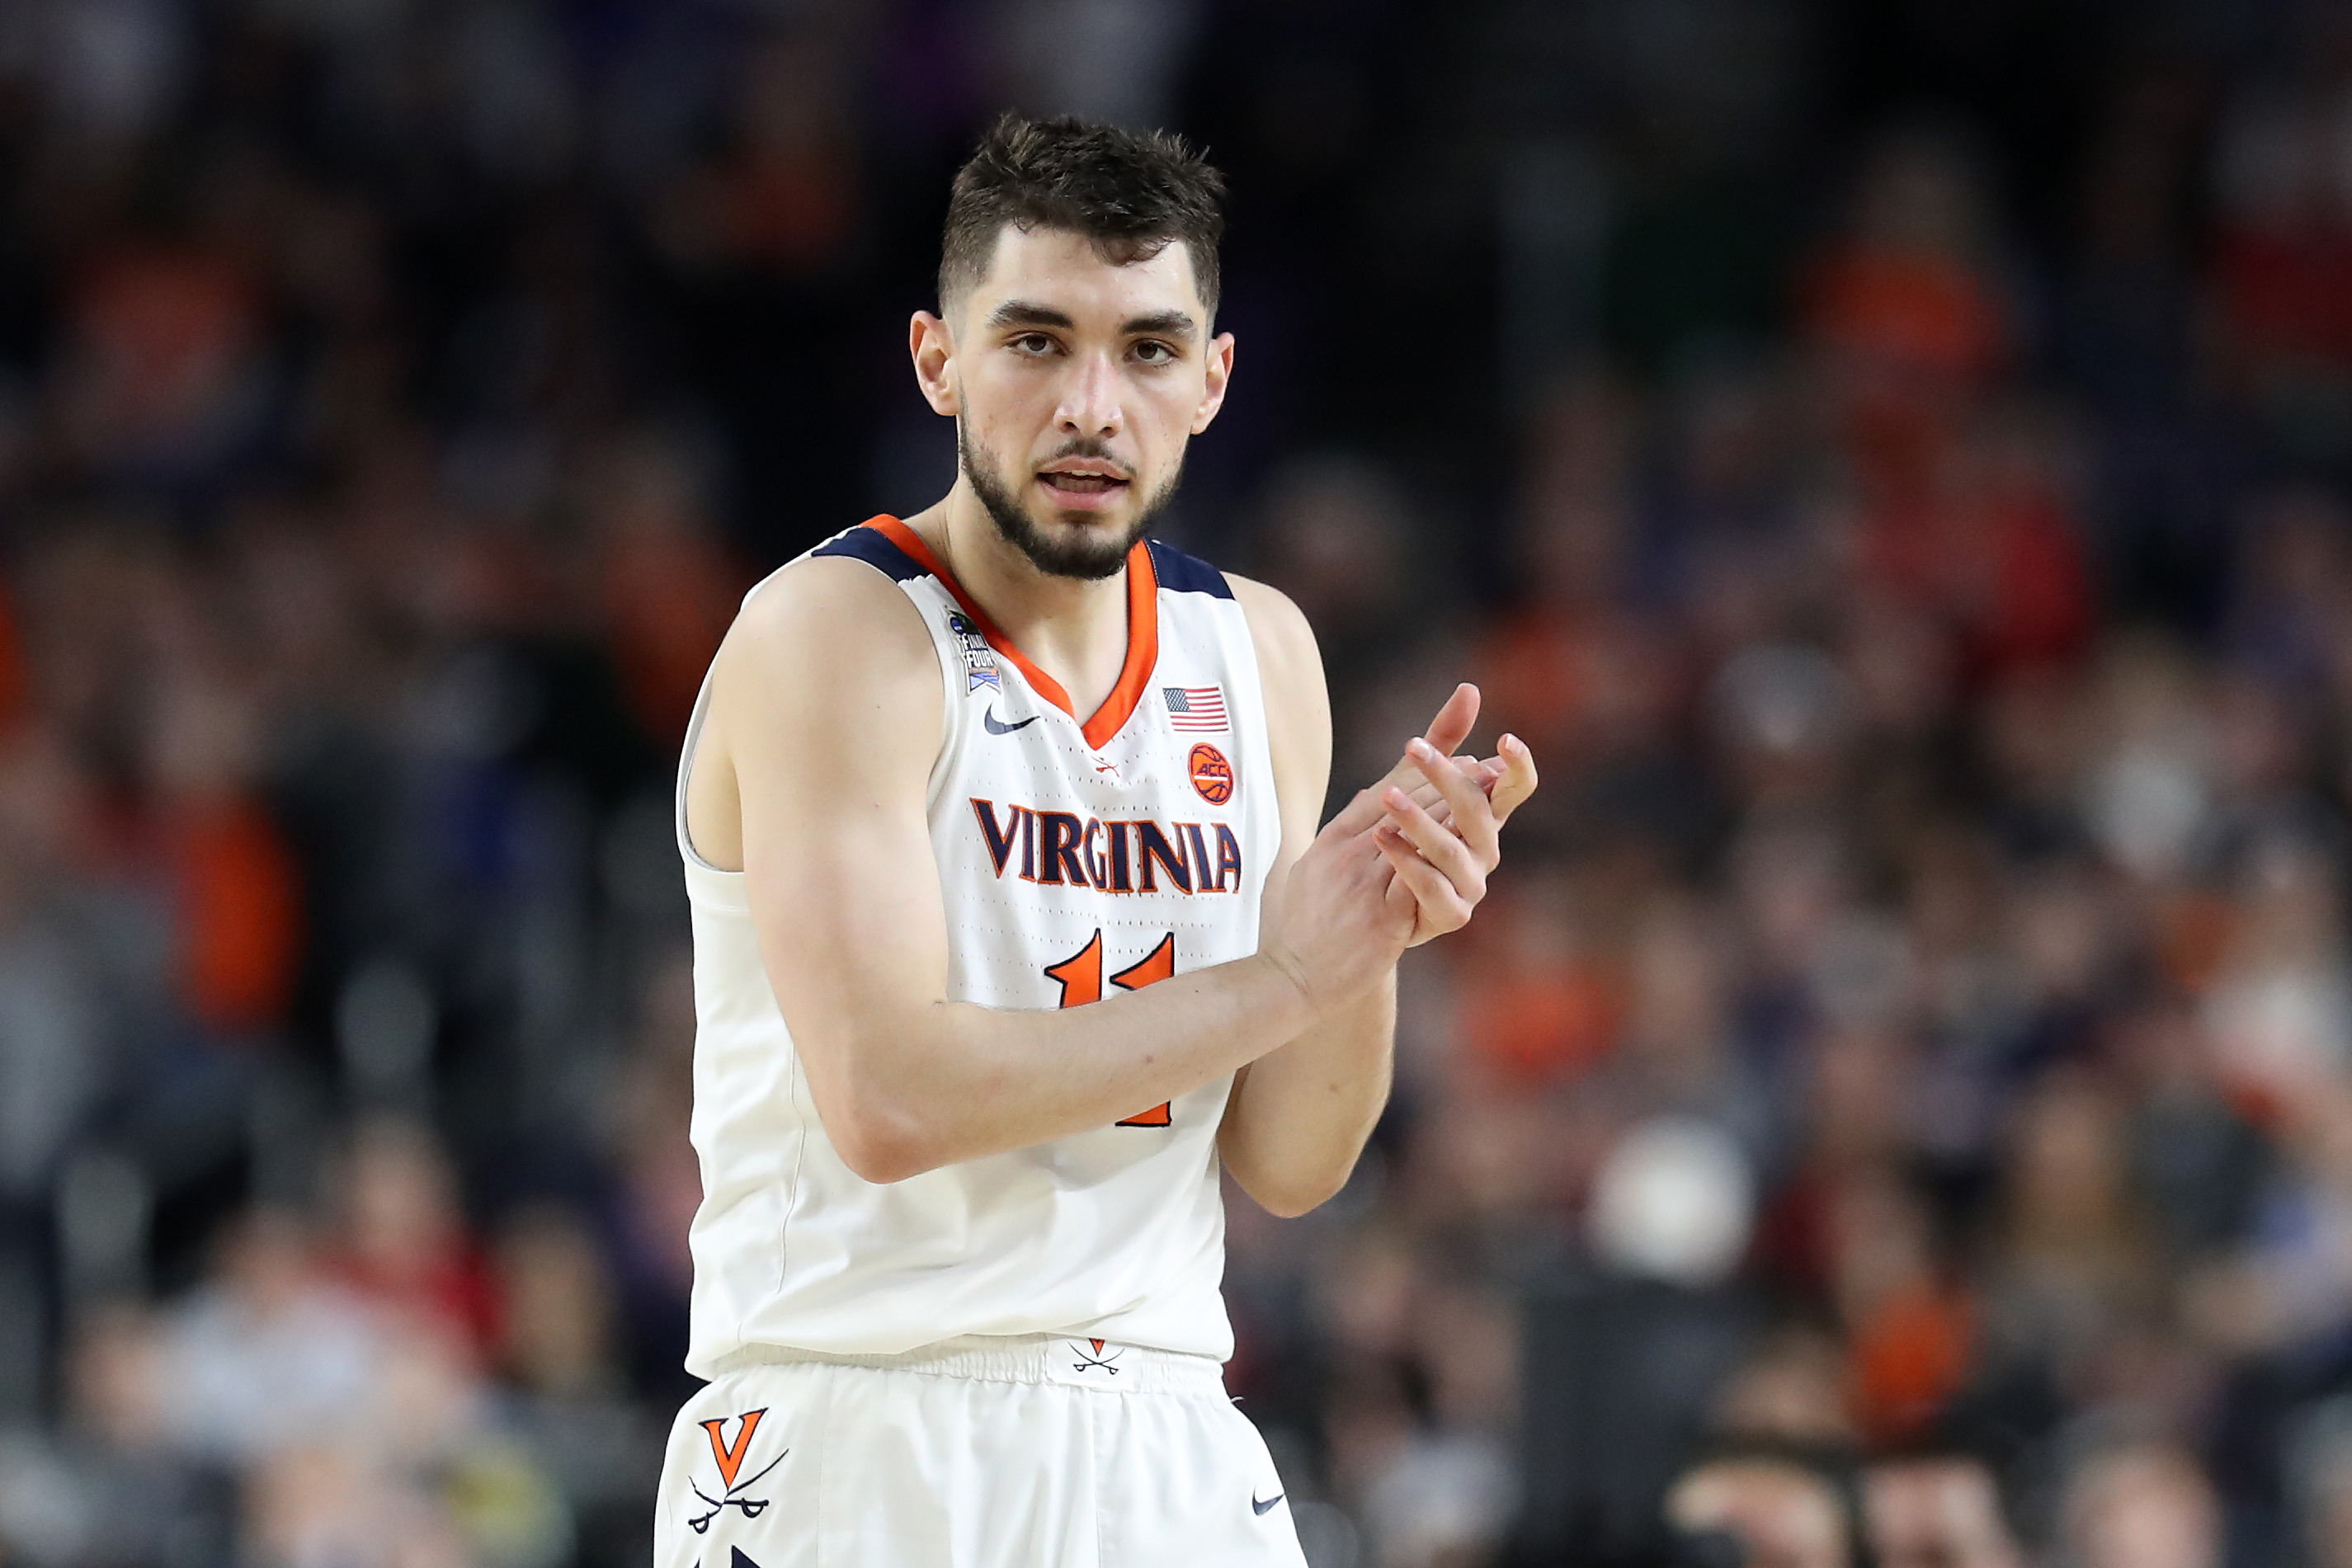 Highlight: Virginia's Ty Jerome beats first half buzzer to give Cavaliers 32-29 halftime lead